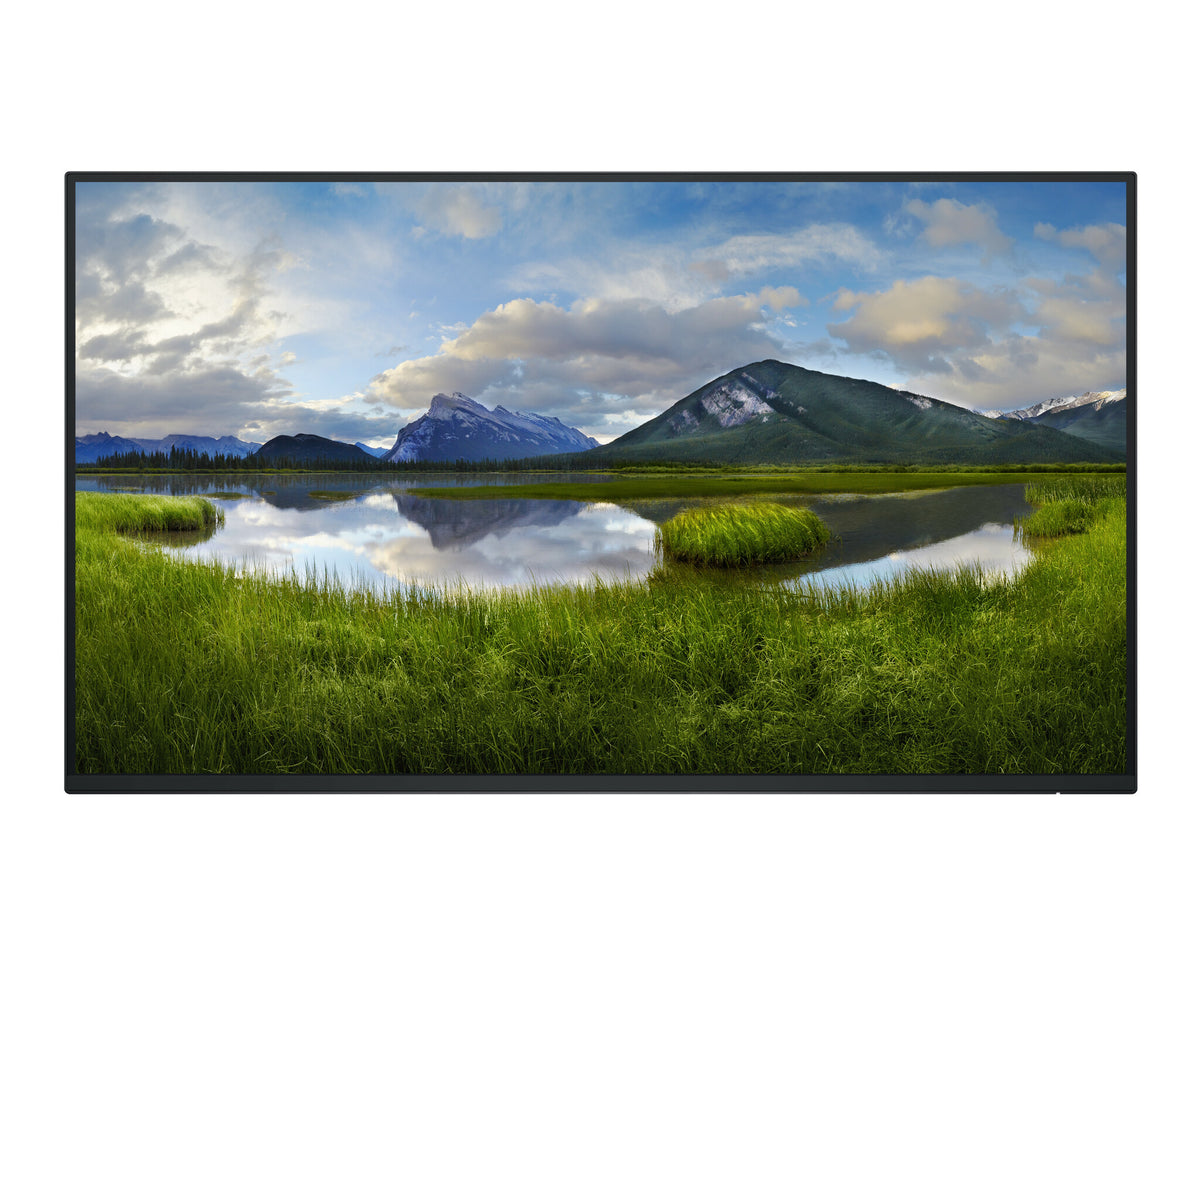 DELL P Series P2725H_WOST - 68.6 cm (27&quot;) 1920 x 1080 pixels Full HD LCD Monitor (No Stand)